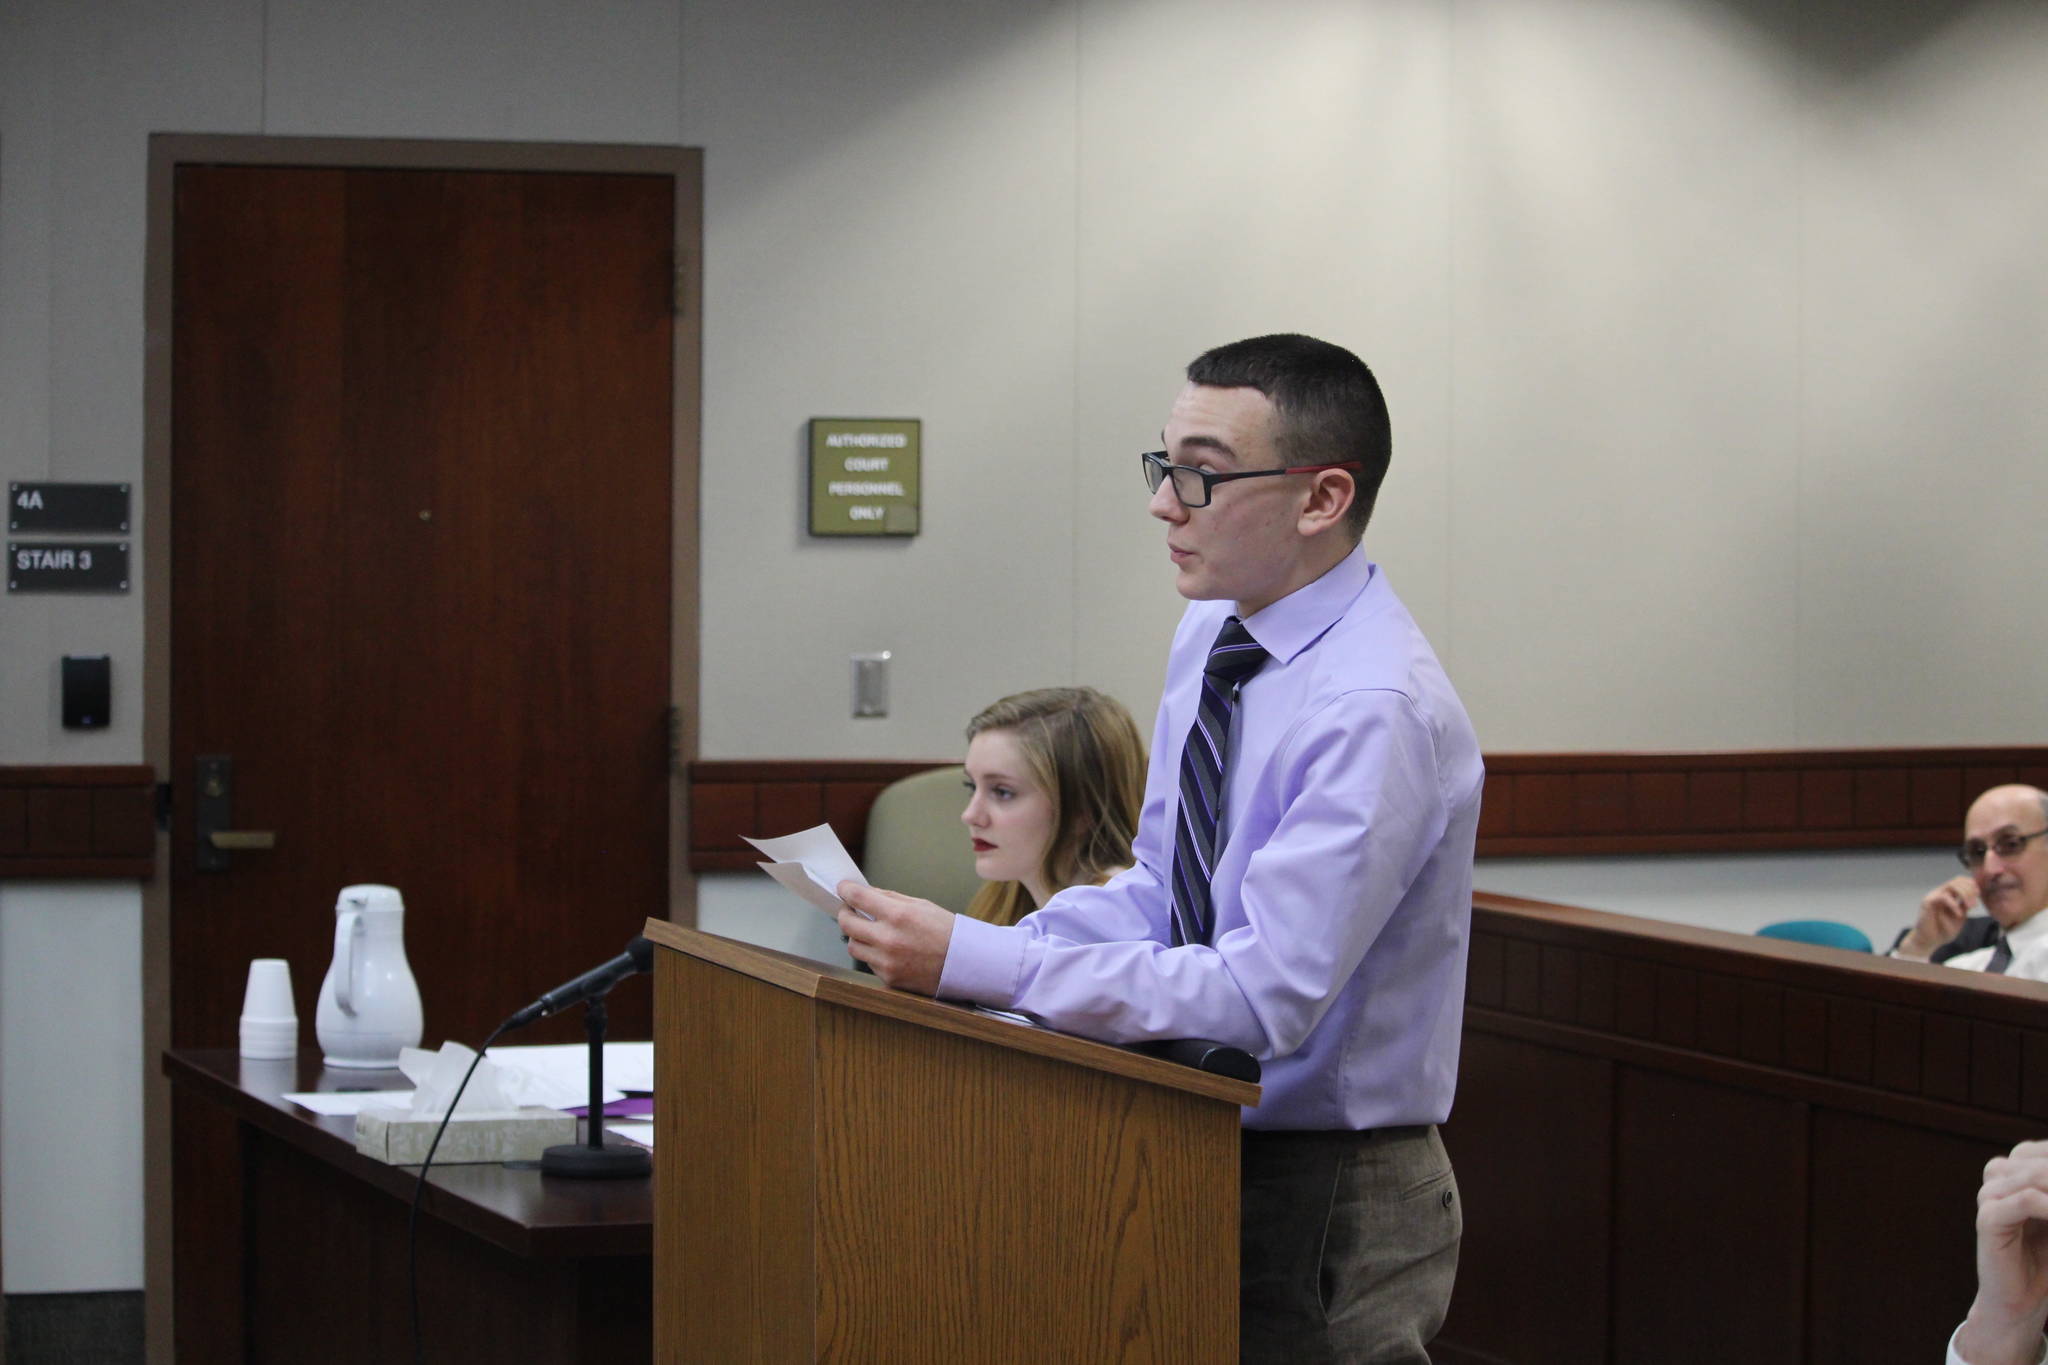 Nikiski Middle/High School senior Joseph Yourkoski, in his role as prosecutor, questions a witness during a mock trial at the Kenai Courthouse on Dec. 3, 2019. (Photo by Brian Mazurek/Peninsula Clarion)